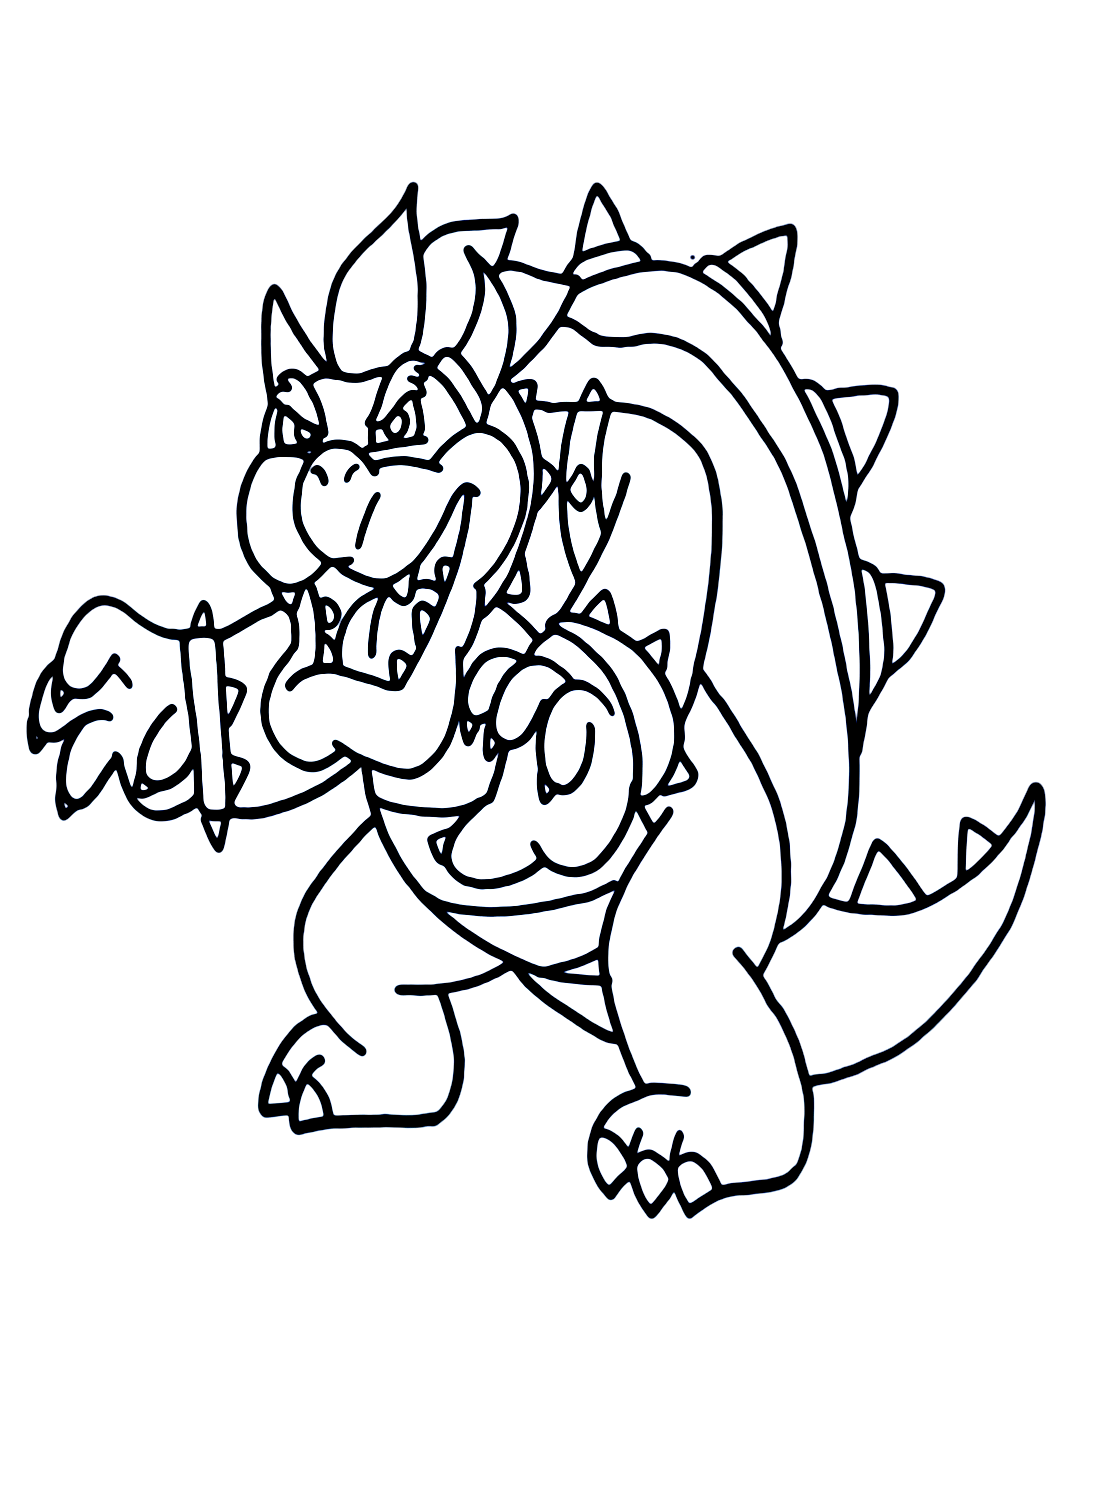 Free Bowser Mario Coloring Pages